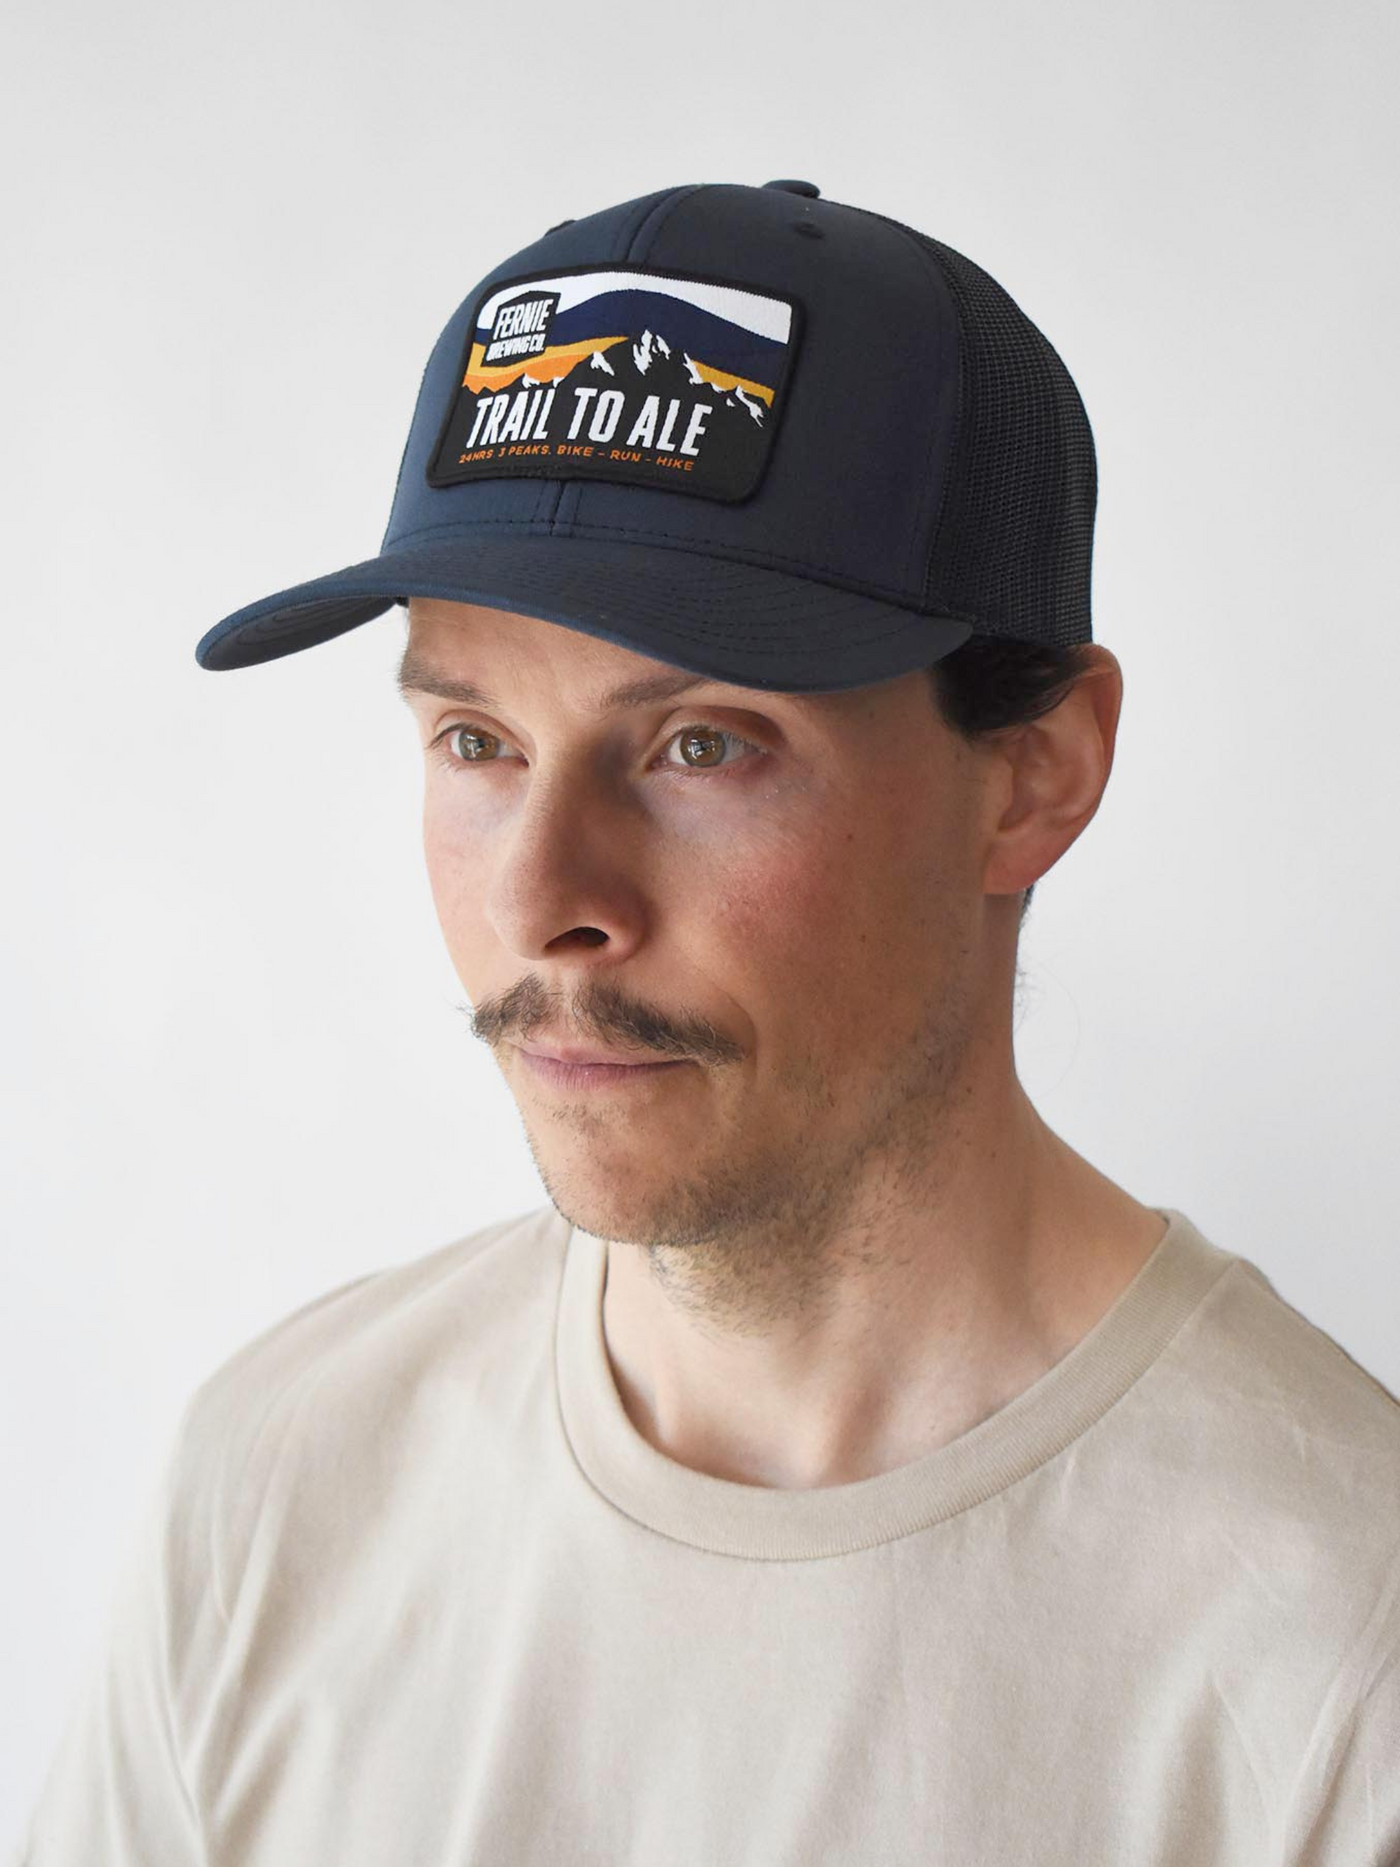 NEW! Trail to Ale™ Trucker Hat